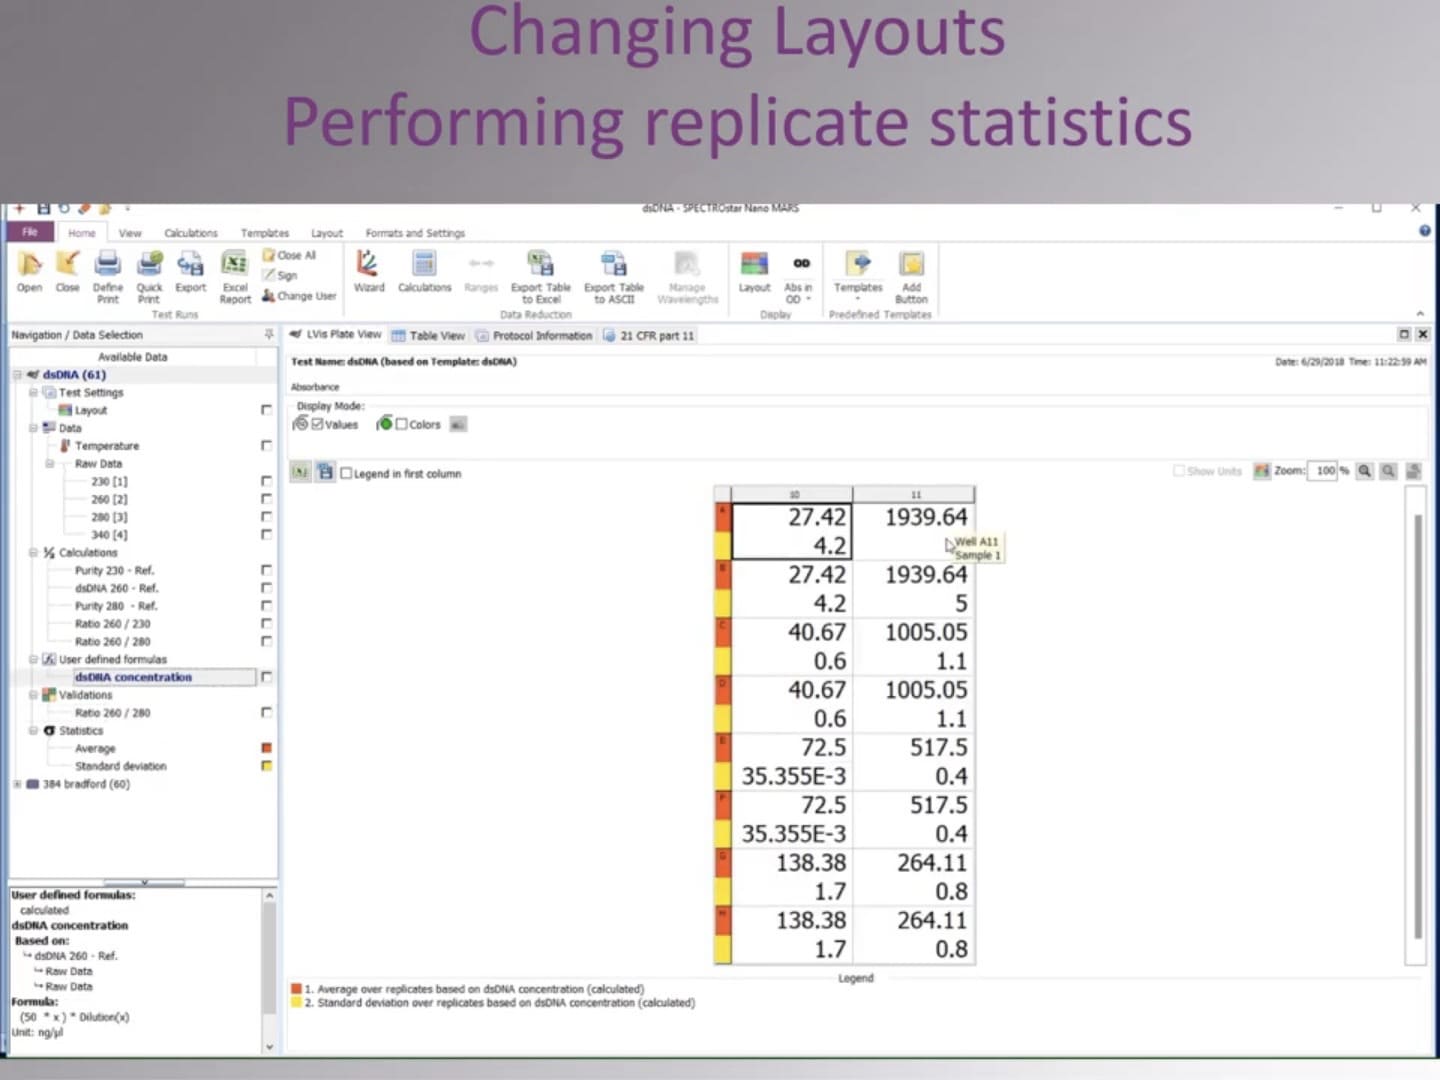 Video MARS Data Analysis Changing Layouts and Performing Replicate Statistics